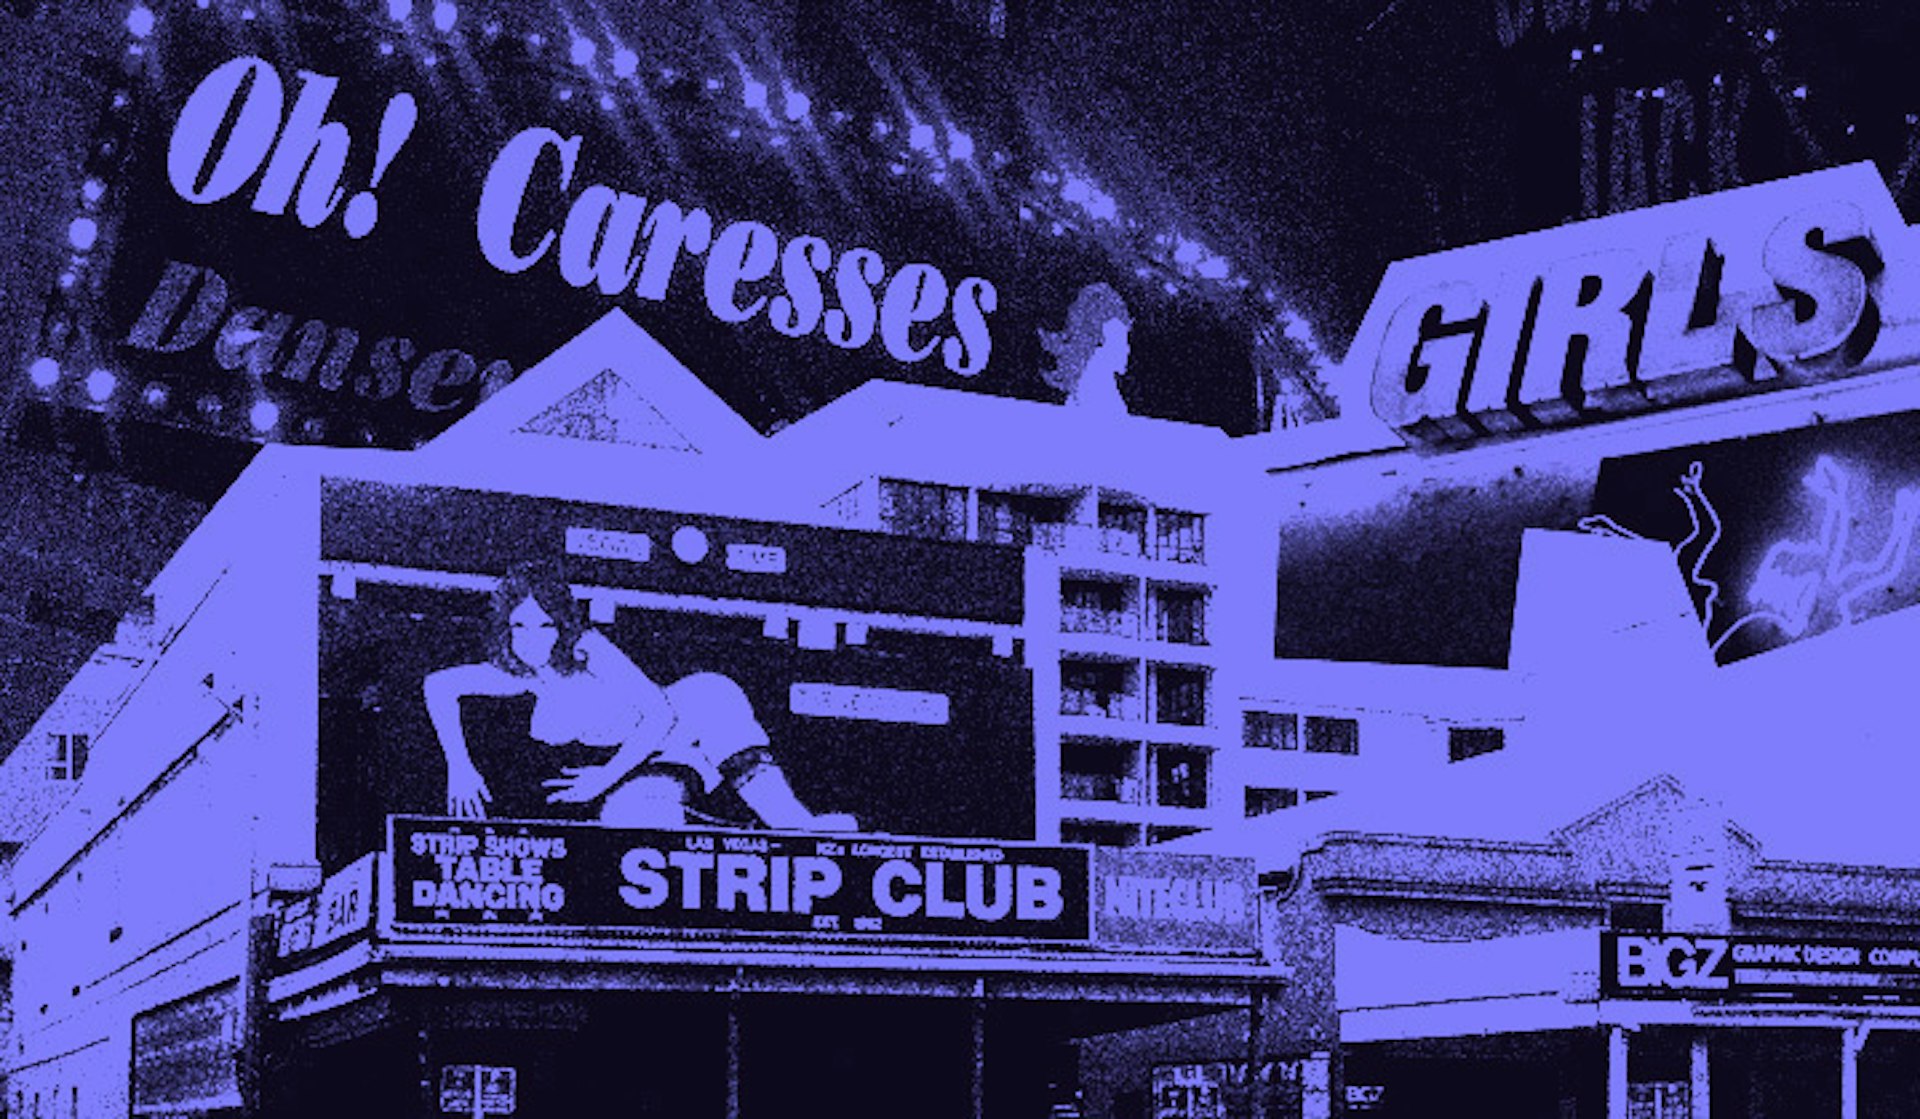 The sex workers fighting Bristol‘s strip club ban